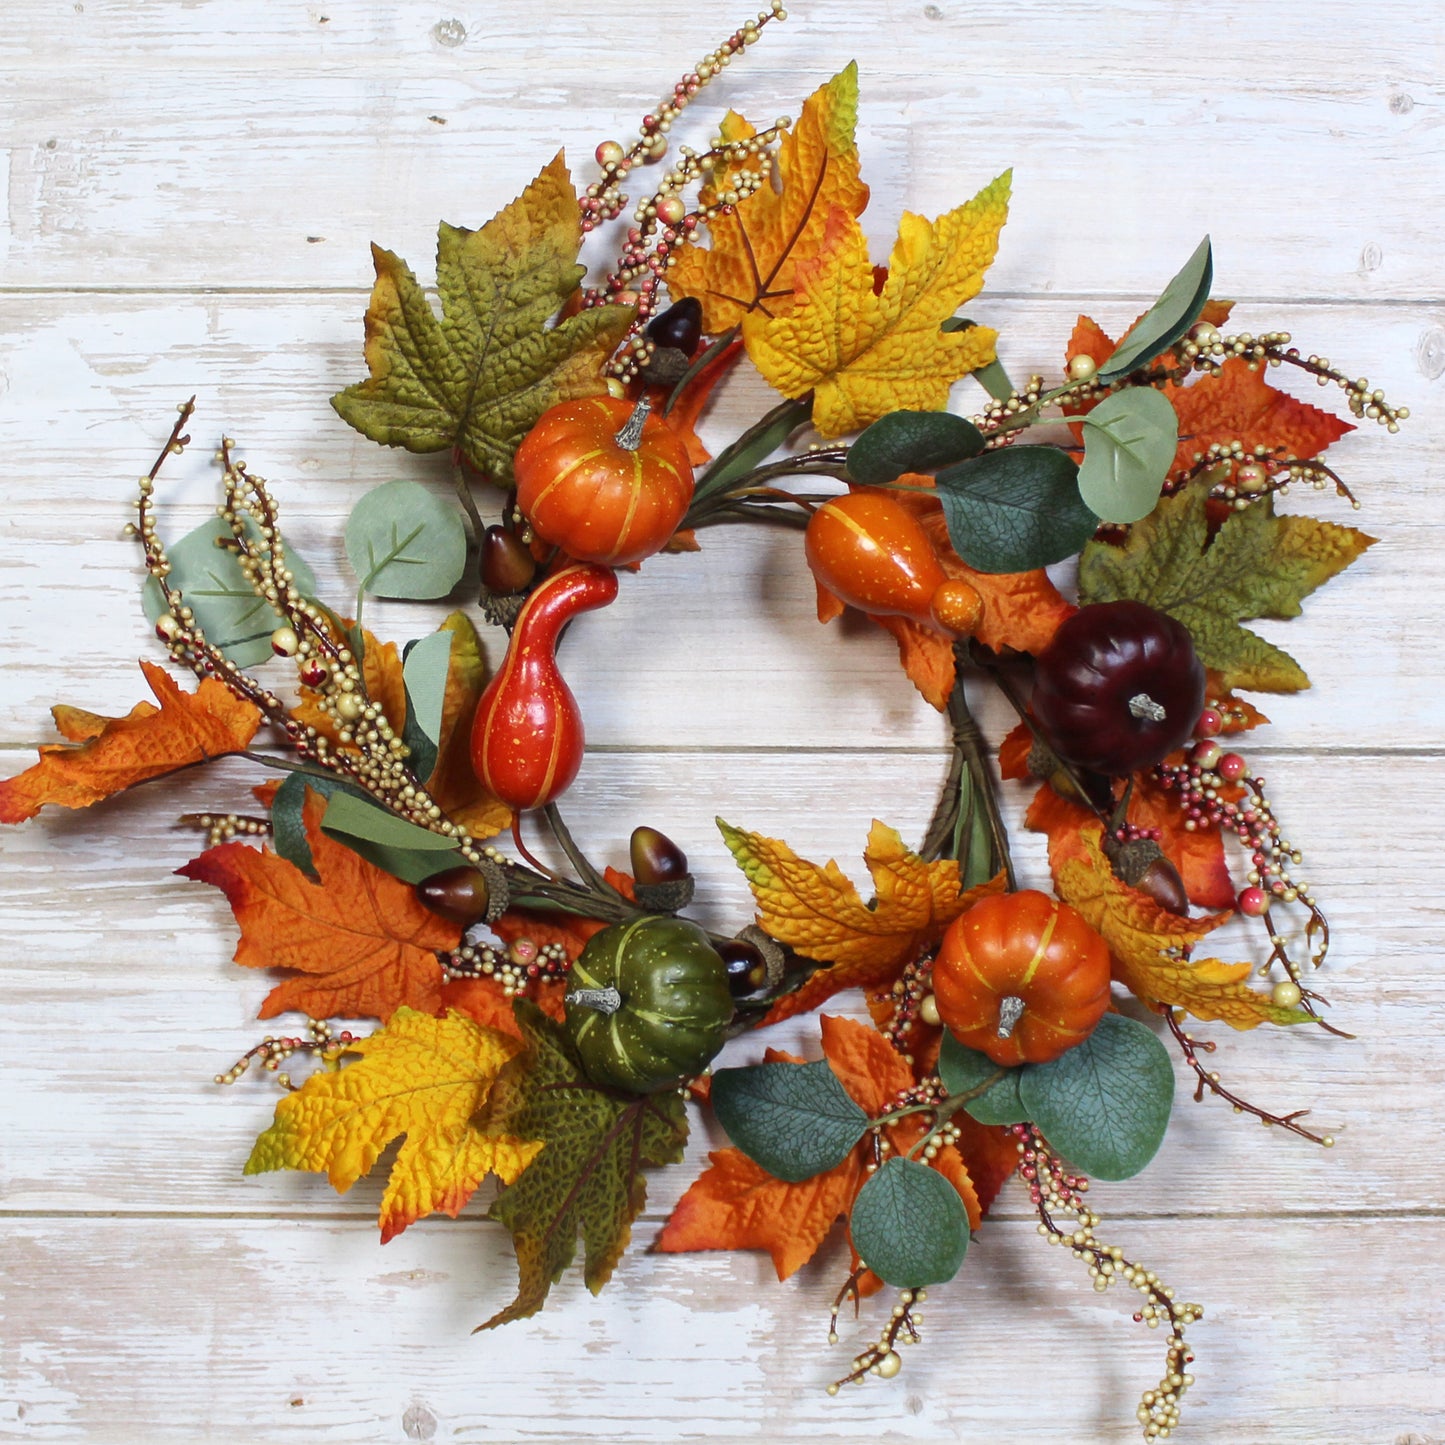 CVHOMEDECO. Primitive Rustic 14 Inch Artificial Pumpkins Wreath with Fall Maple Leaves and Berry, Harvest Festival Wreath for Front Door and Home Decor.